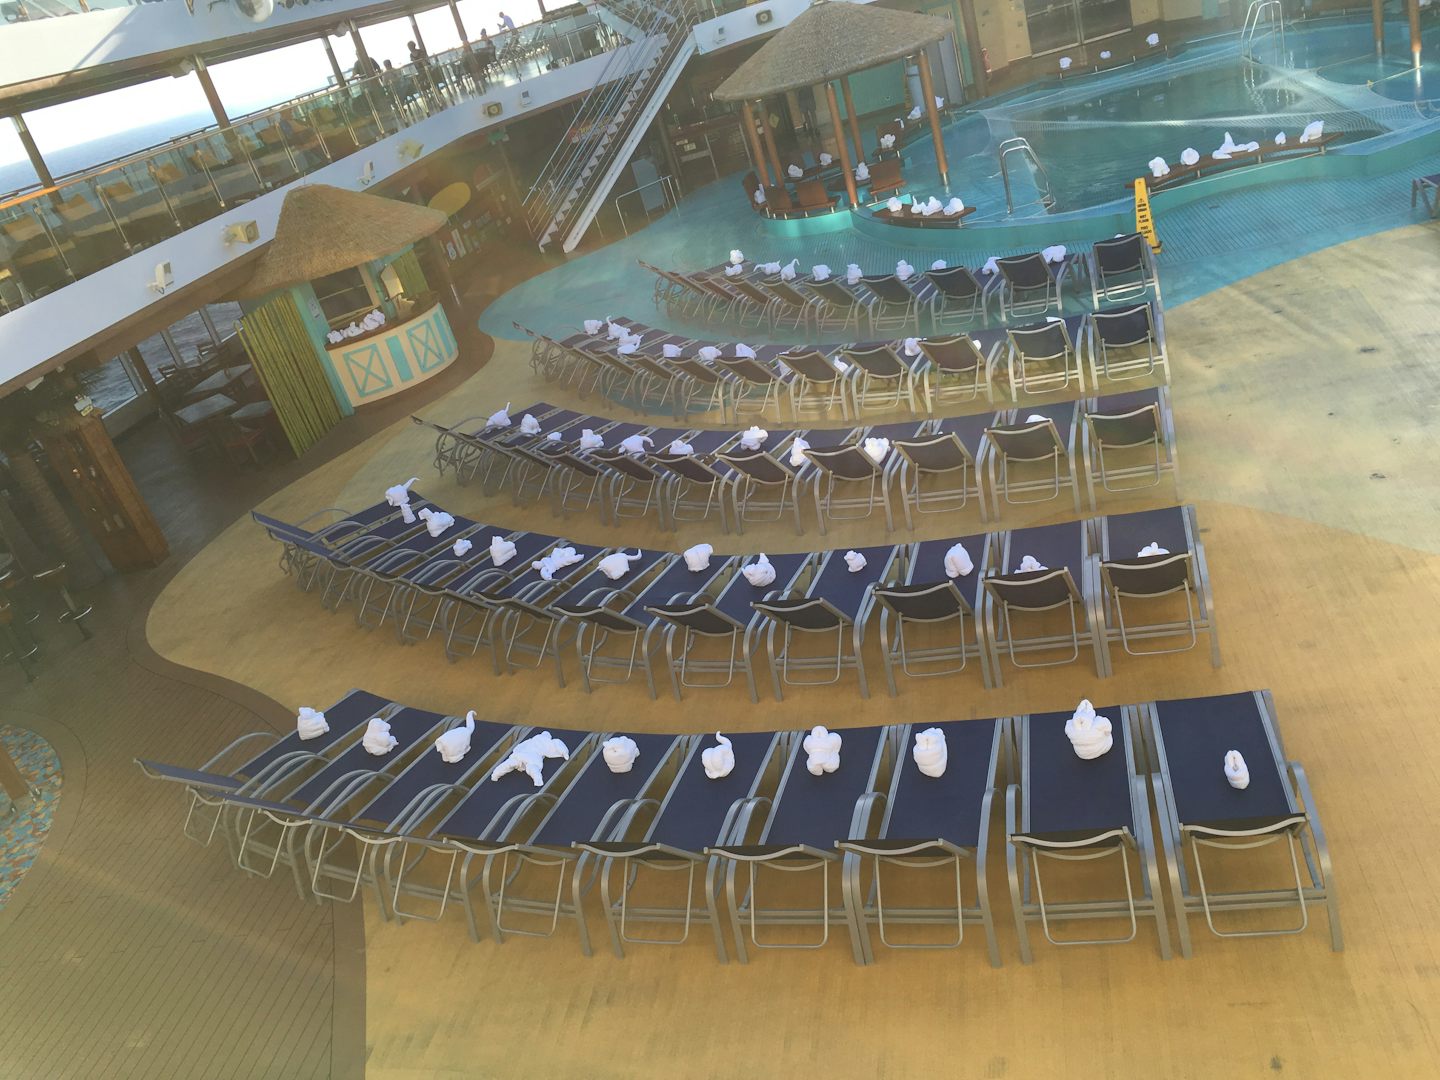 Towel animals taking over the ship